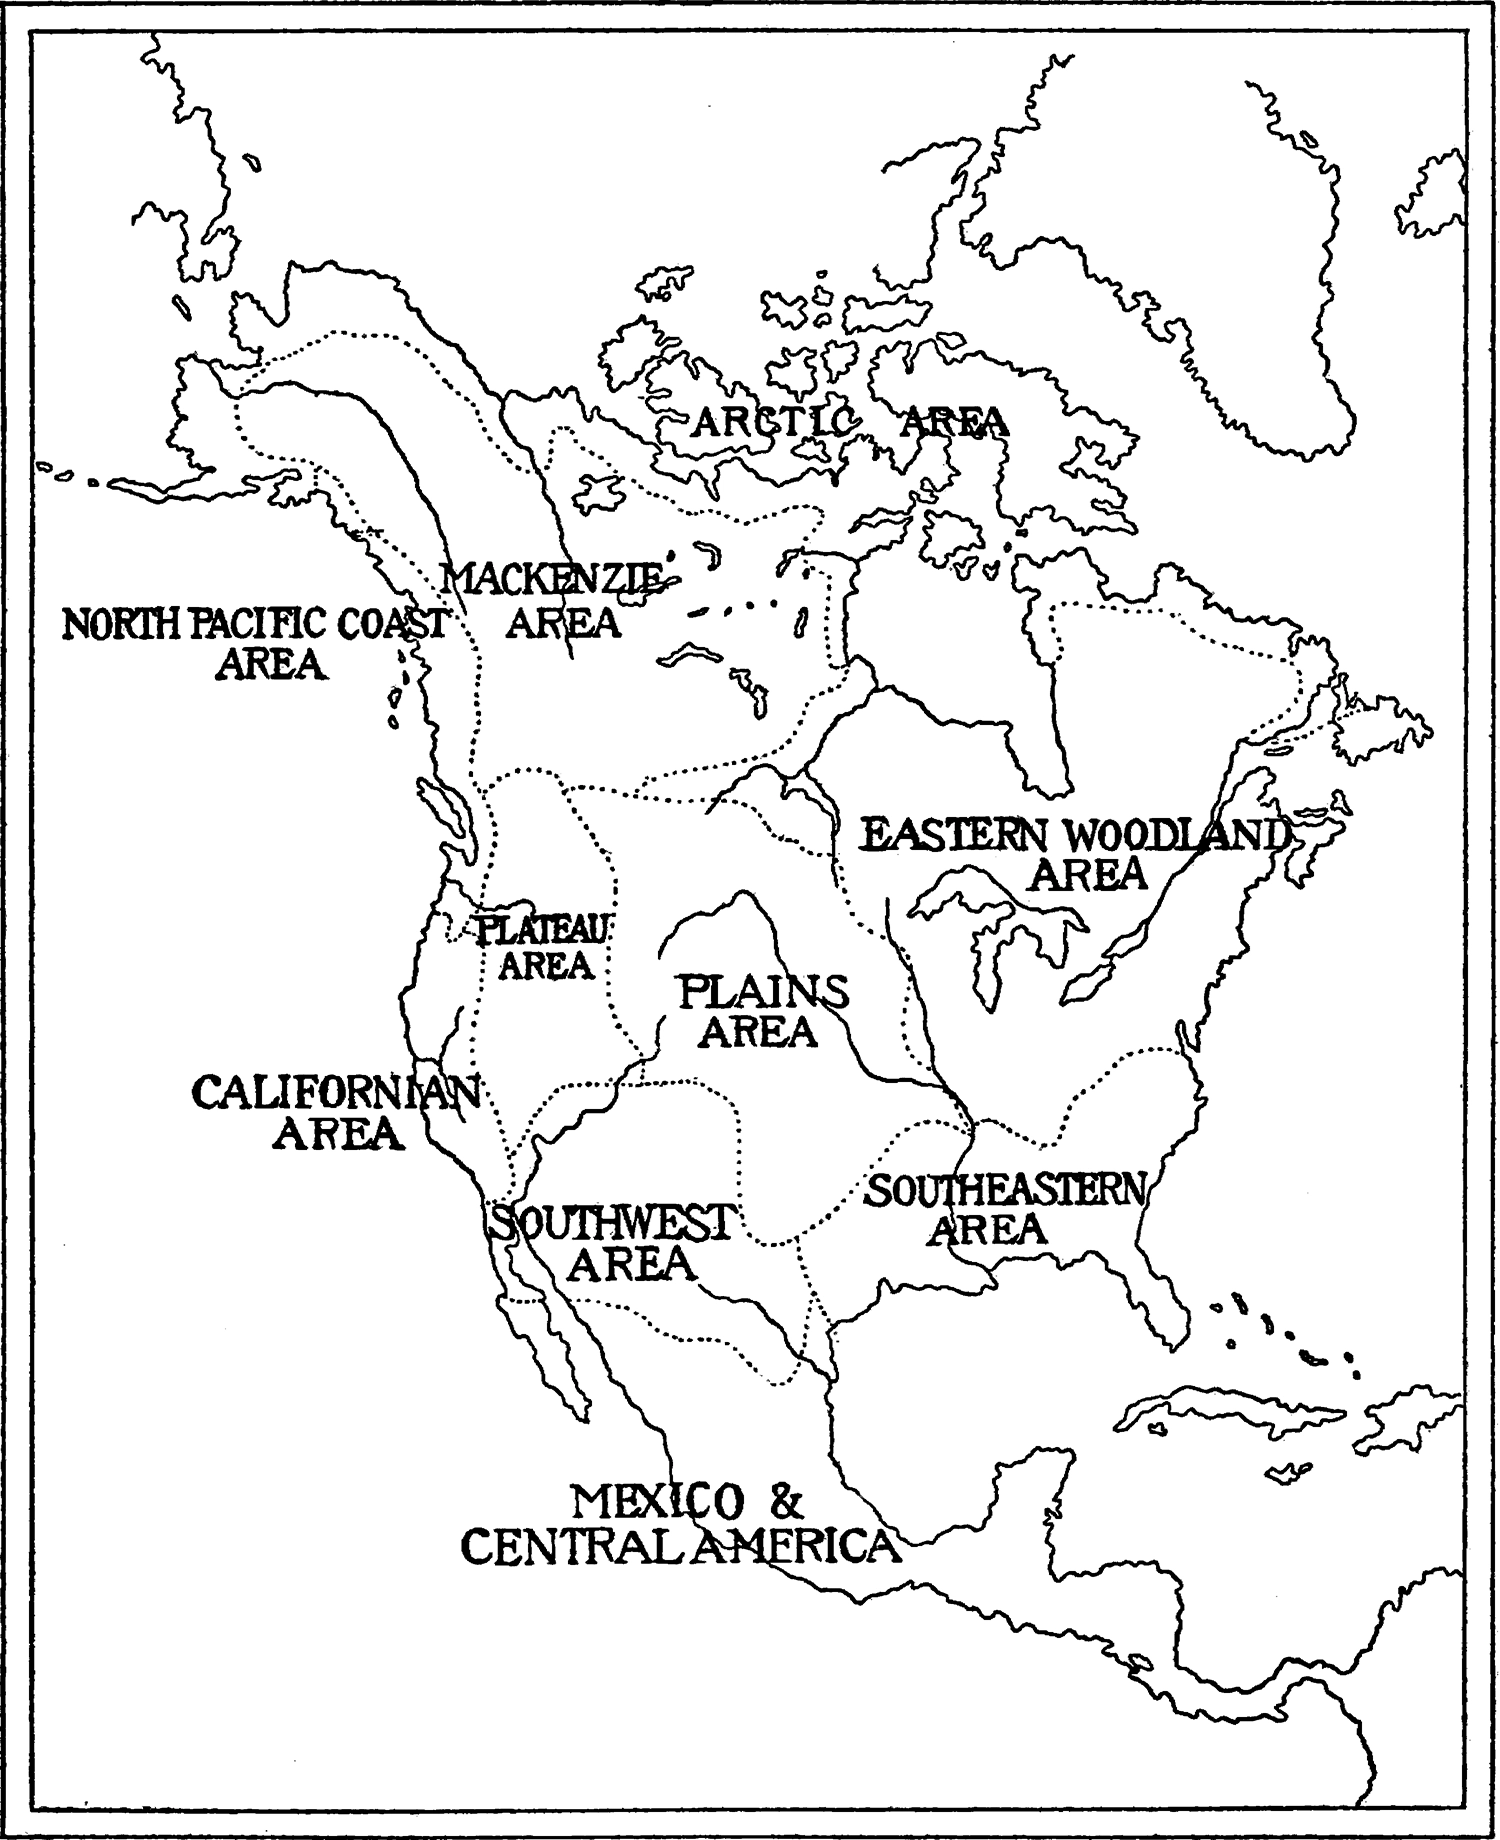 “Culture-areas” outlined on a map of North America.